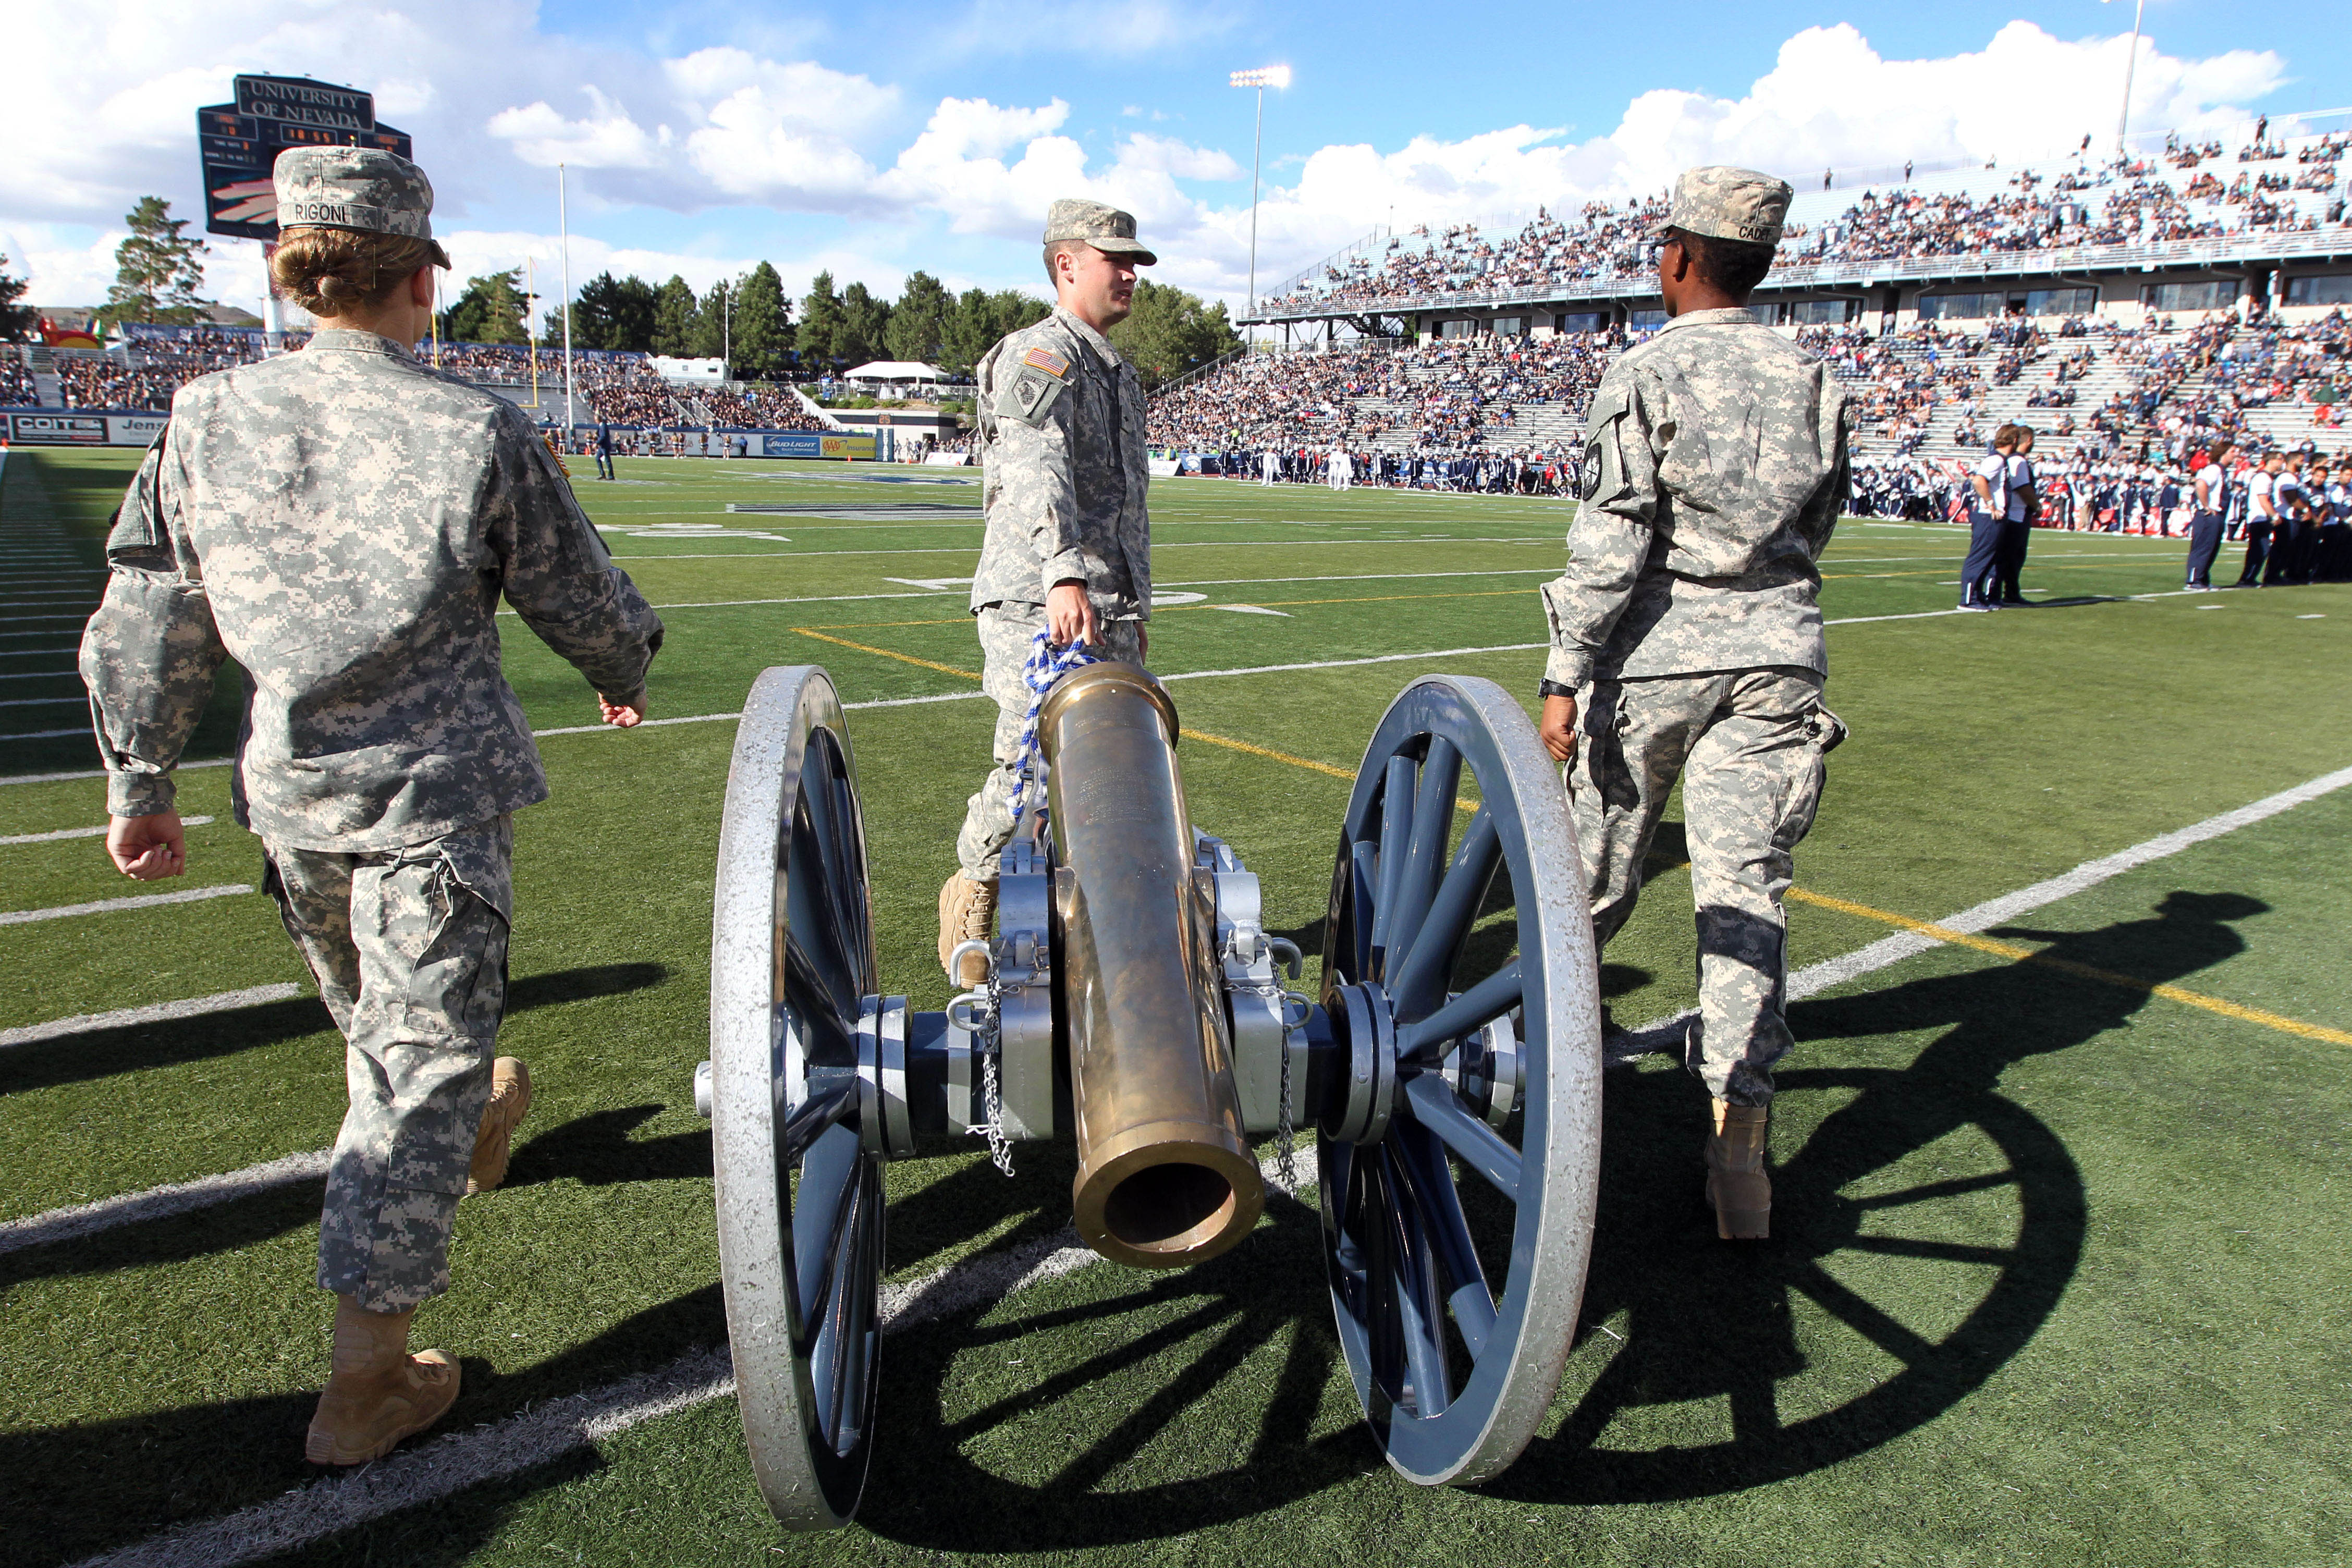 Oct 3, 2015; Reno, NV, USA; Nevada Wolf Pack ROTC students bring out the Fremont Cannon which goes to the winner of the annual state rivalry game between the Wolf Pack and ULNV running Rebels at MacKay Stadium. Mandatory Credit: Lance Iversen-USA TODAY Sports ORG XMIT: USATSI-226616 ORIG FILE ID: 20151003_gma_ib2_102.jpg